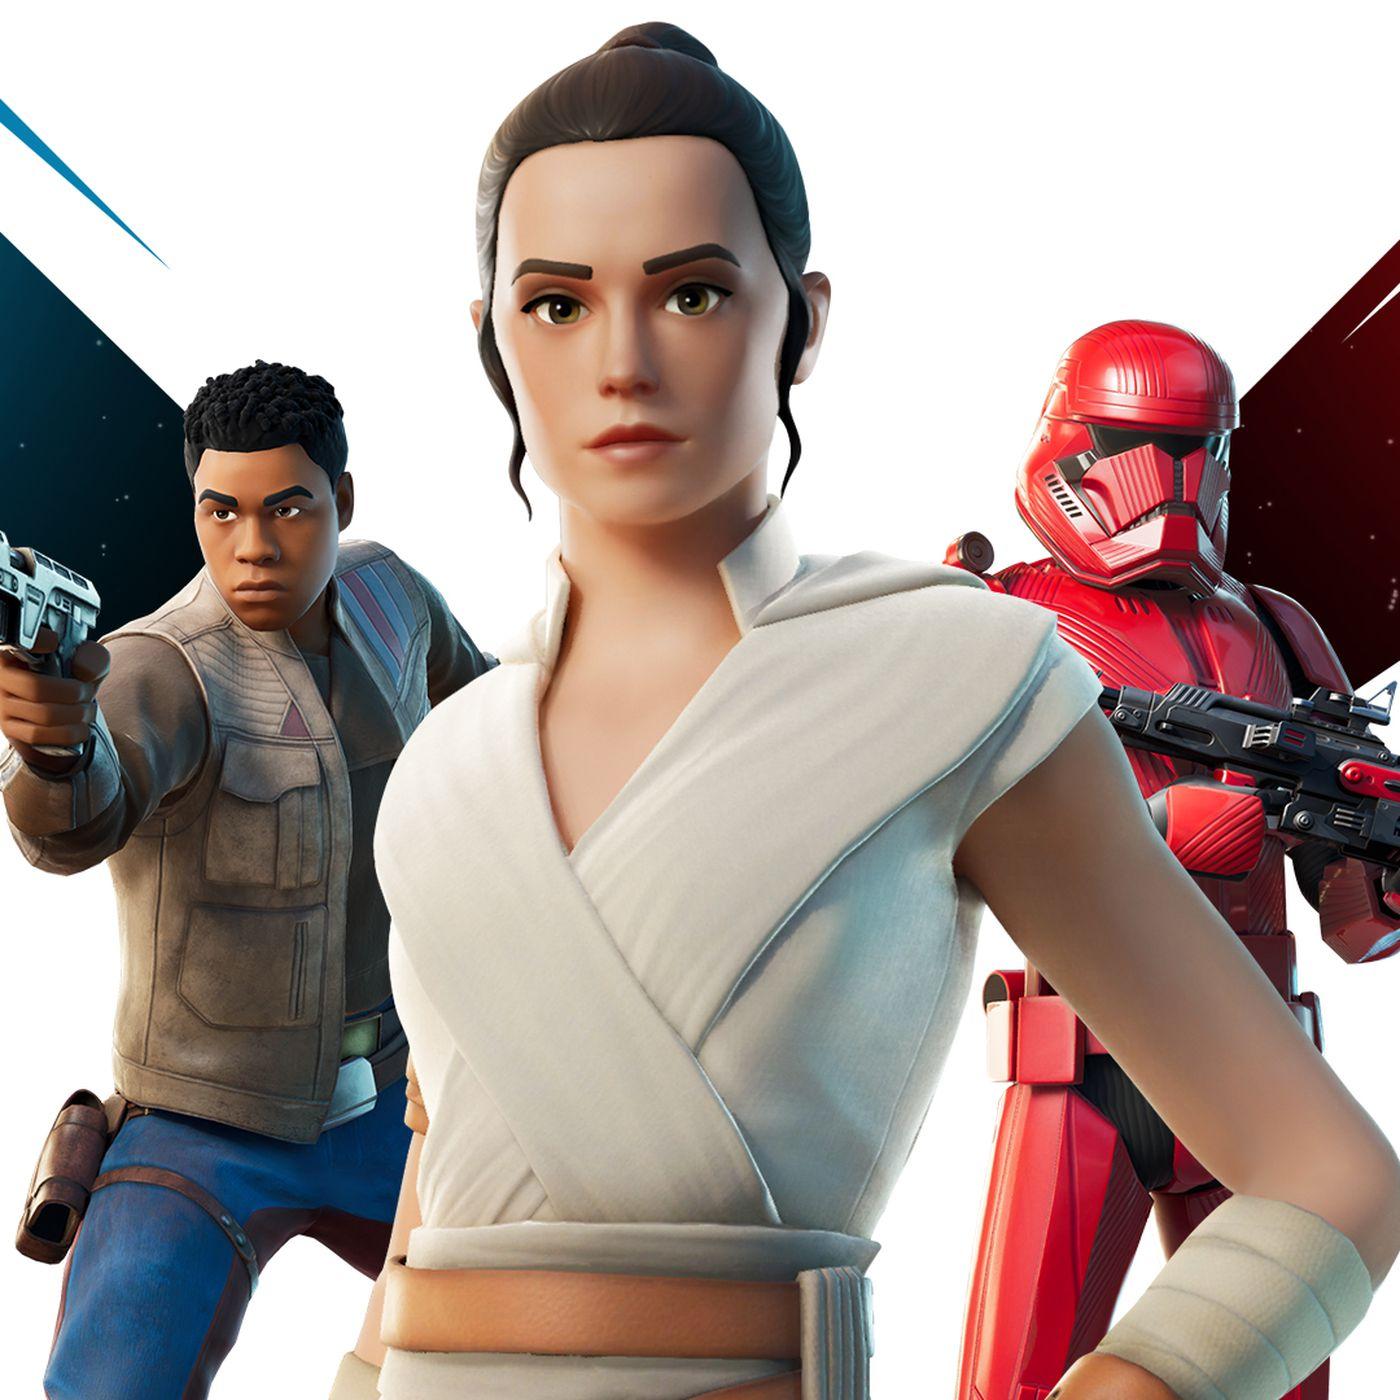 Fortnite adds Rey and Finn skins in time for Star Wars: The Rise